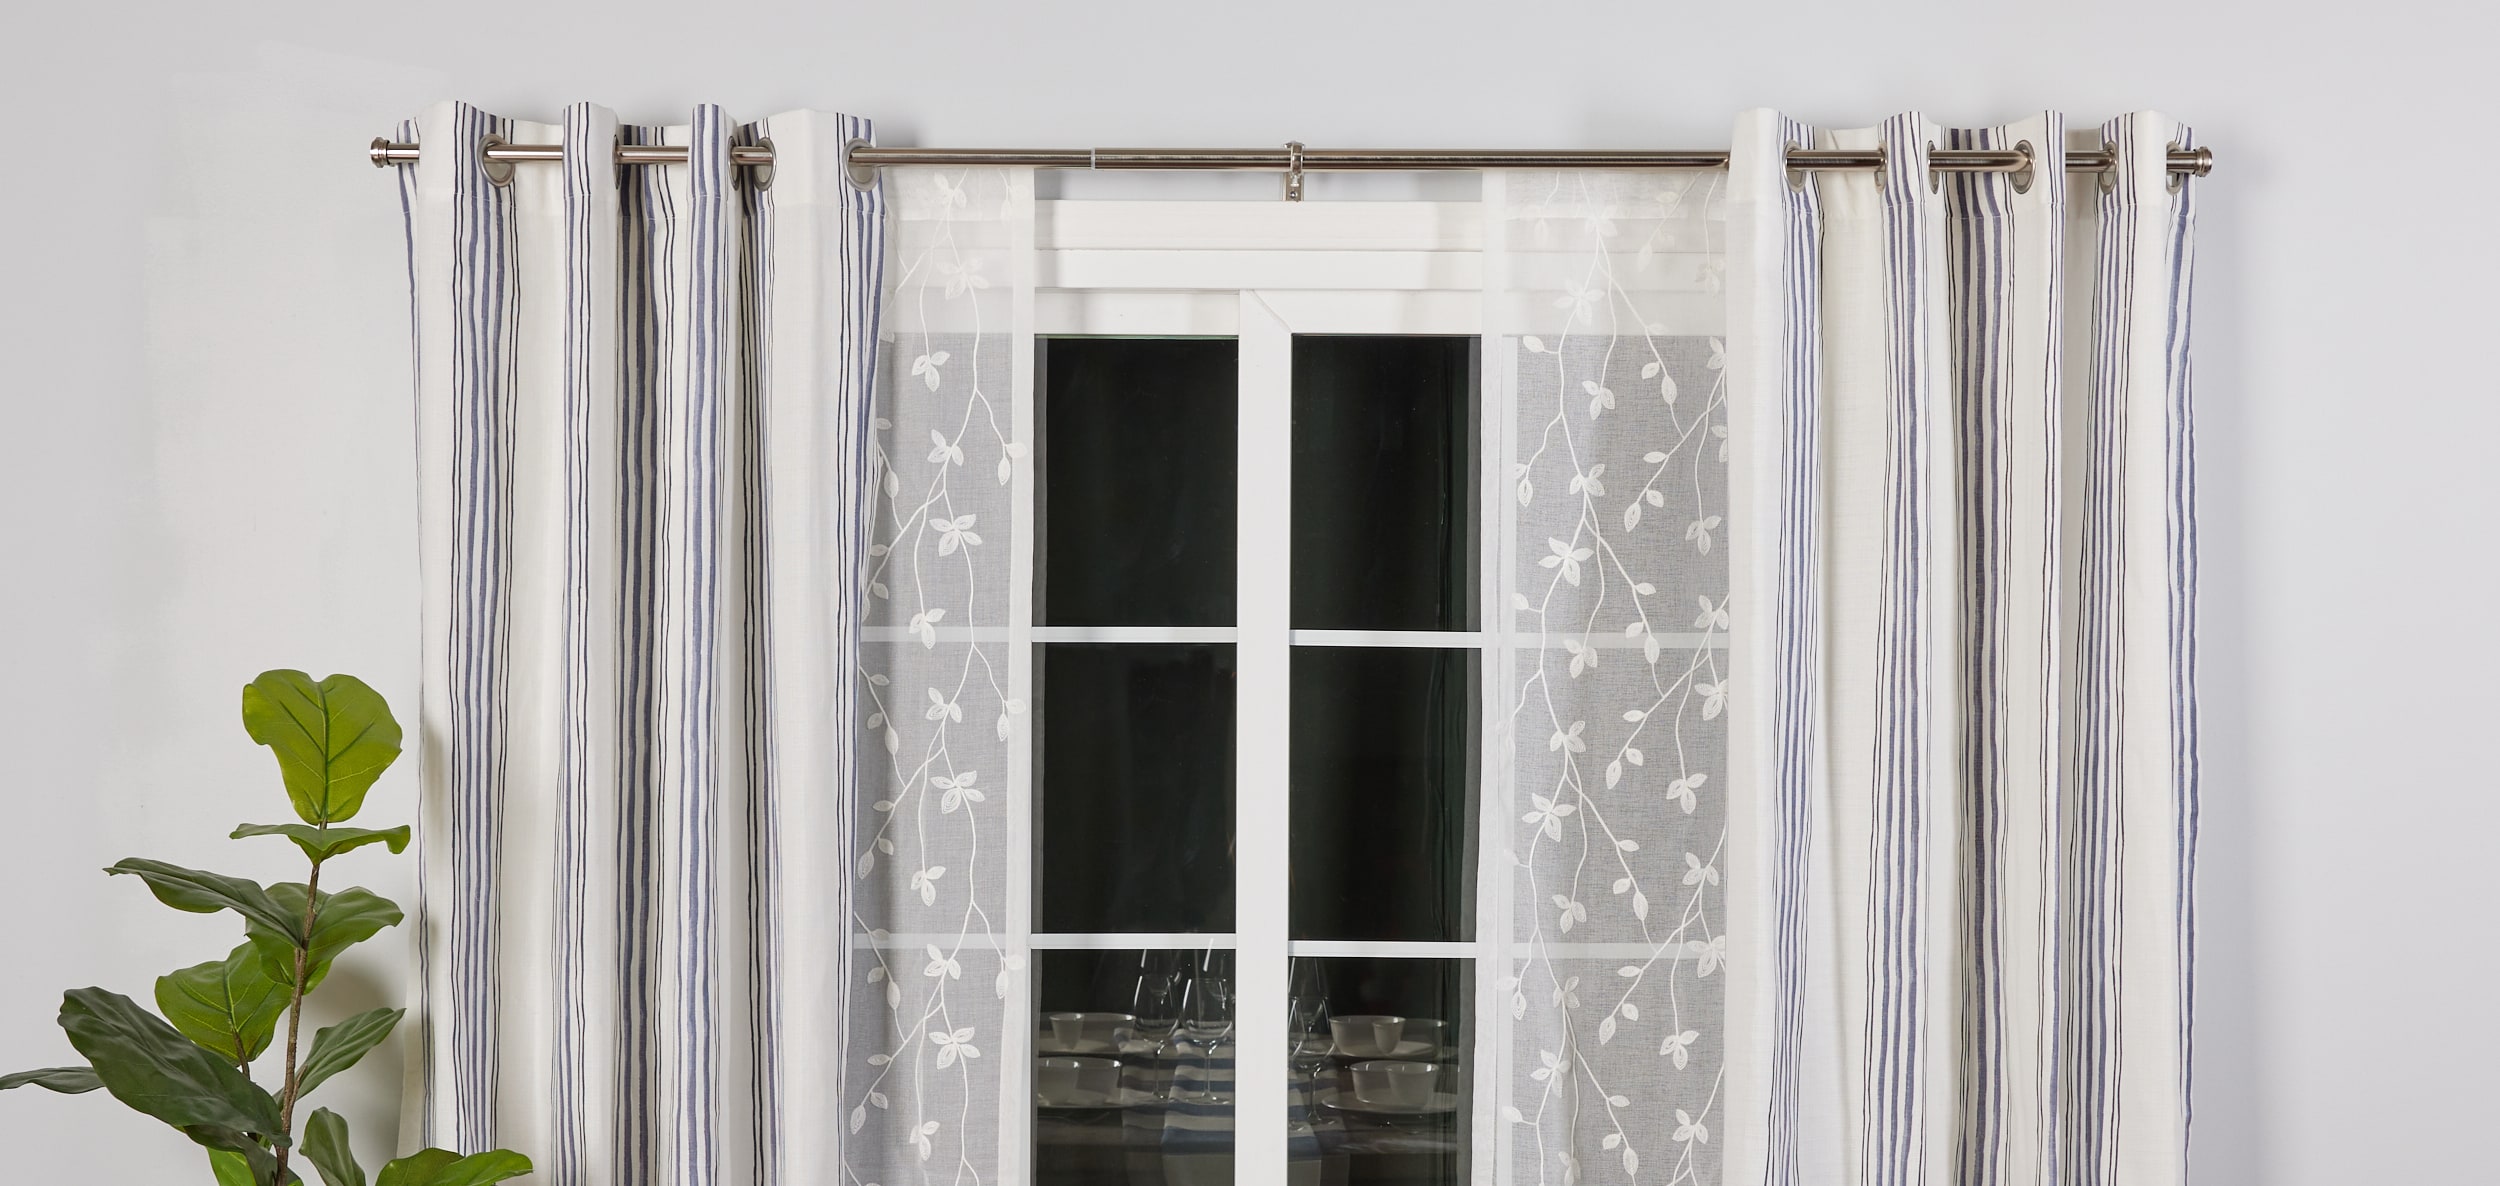 Double curtain rod Window Treatments at Lowes.com